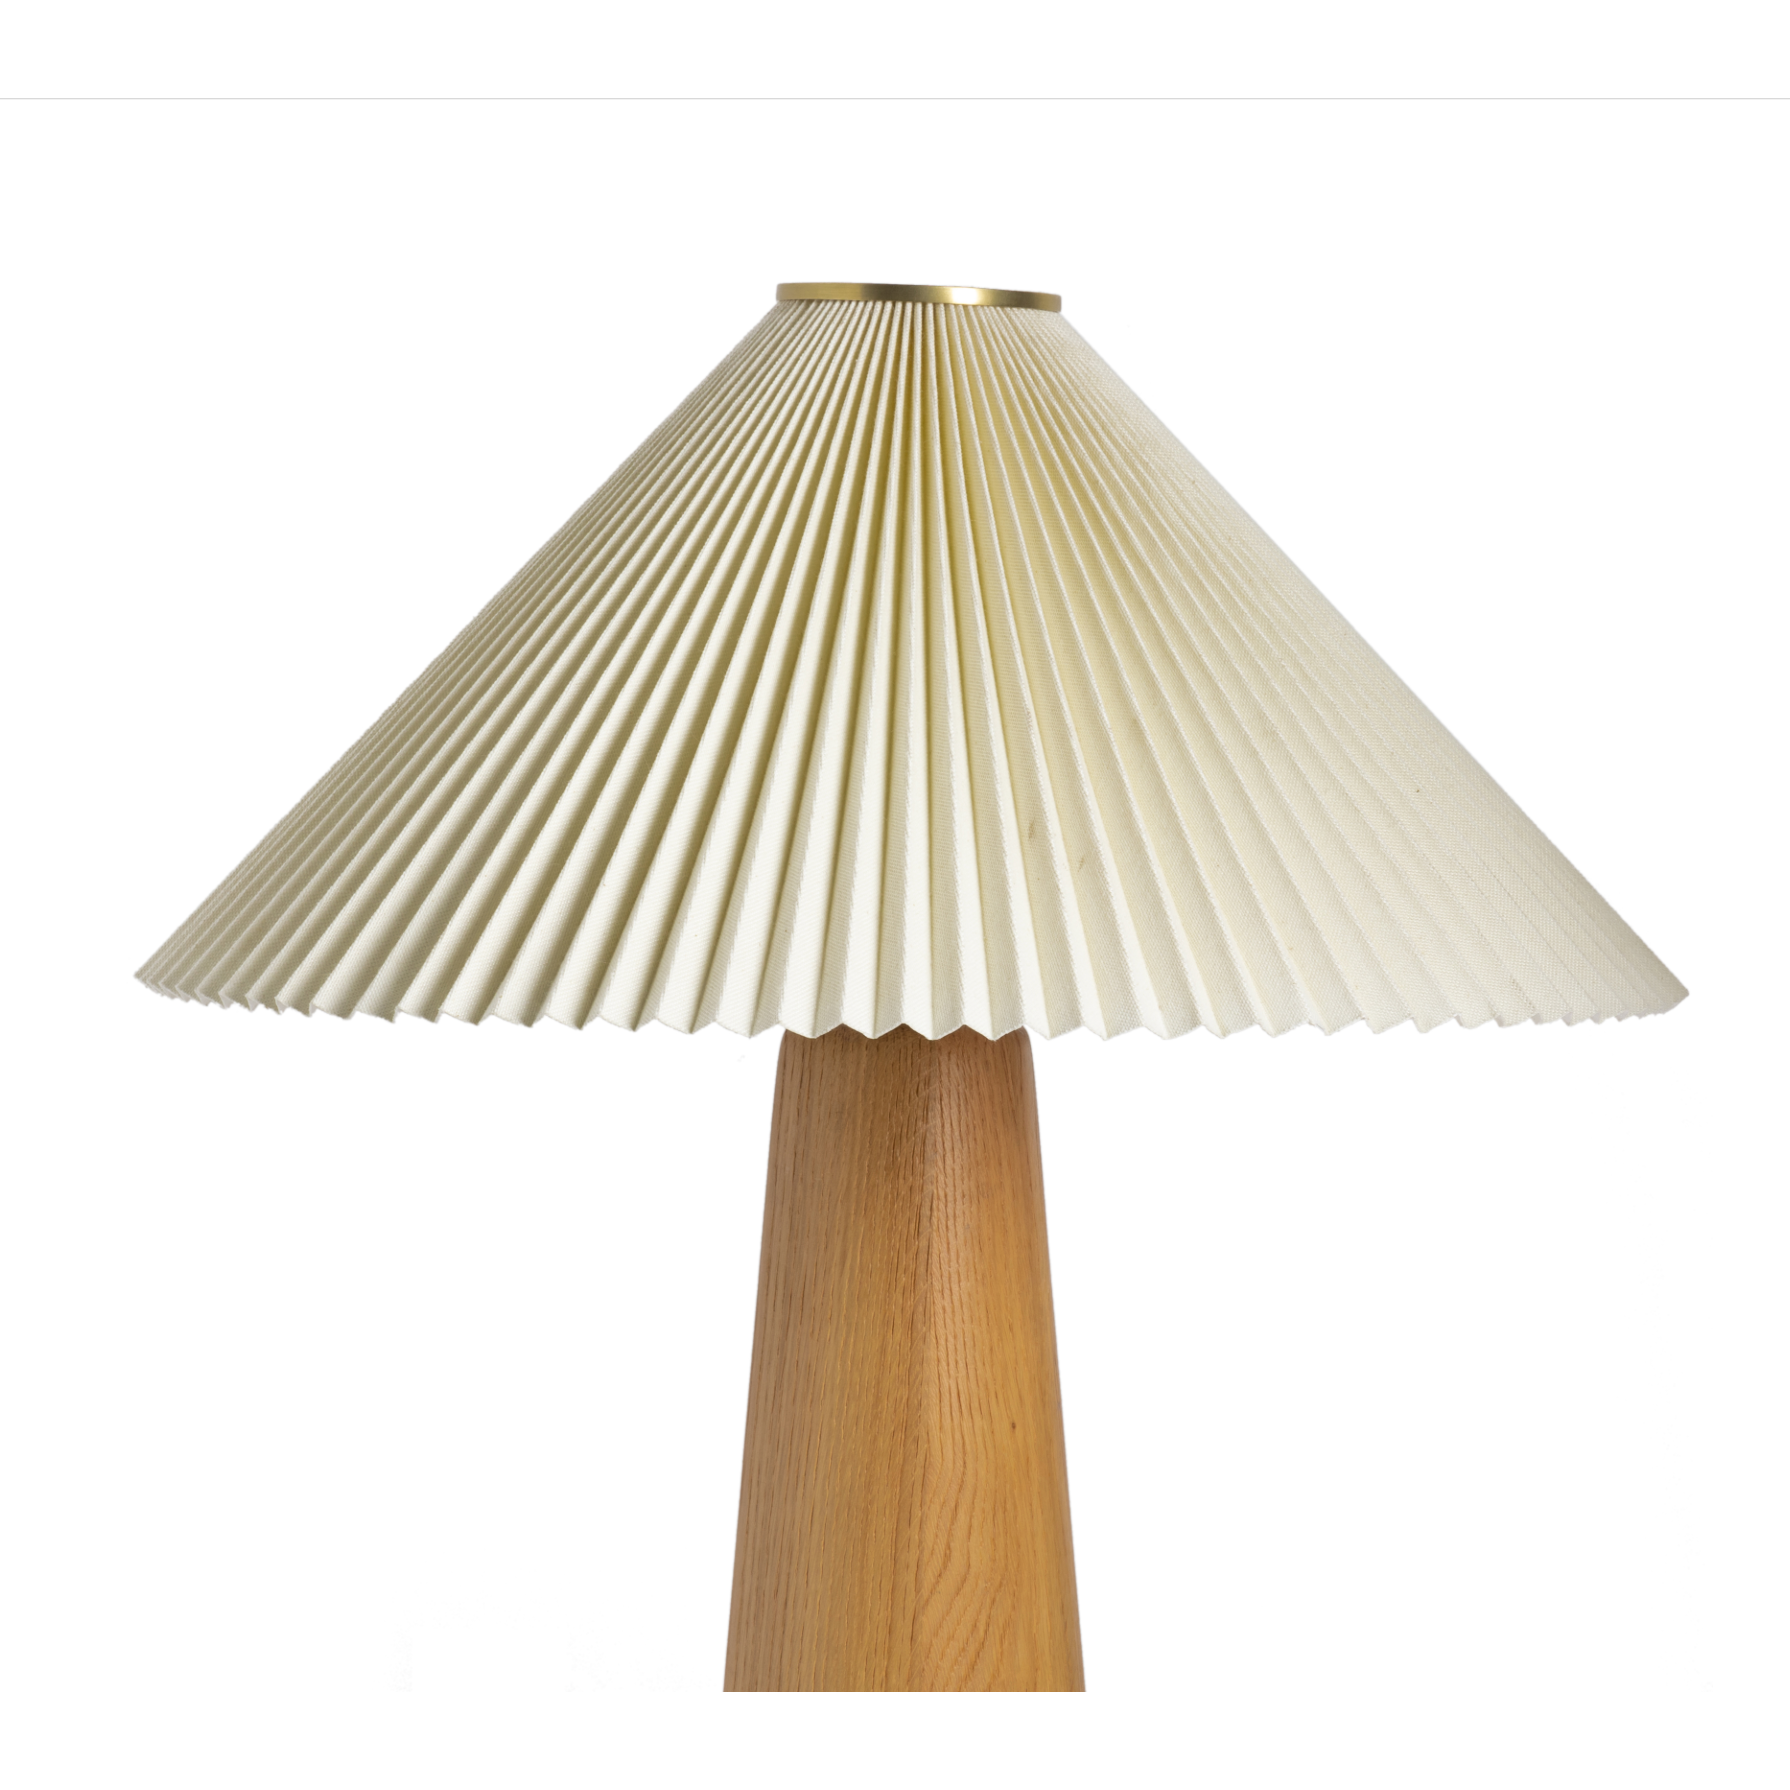 Modern minimal meets traditional. A tapered wood table lamp base is topped with a design-forward pleated shade. Amethyst Home provides interior design, new home construction design consulting, vintage area rugs, and lighting in the Louisville metro area.